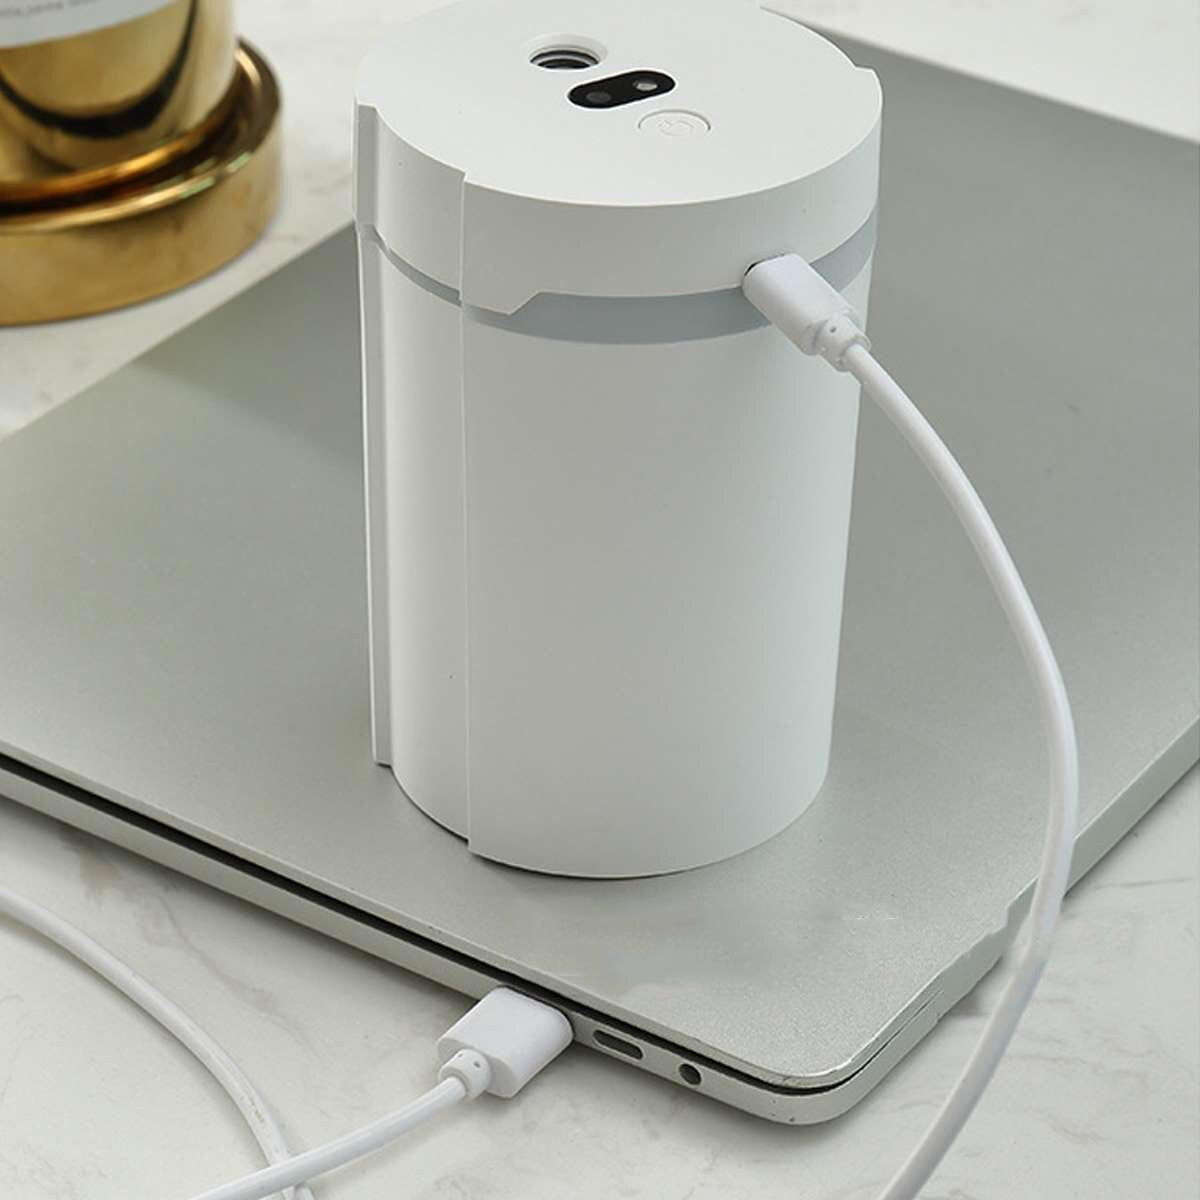 280ML Intelligent Induction Sprayer Mini Portable Air Humidifier With Night Light USB Charging Mute Touch Dustproof for Home Office